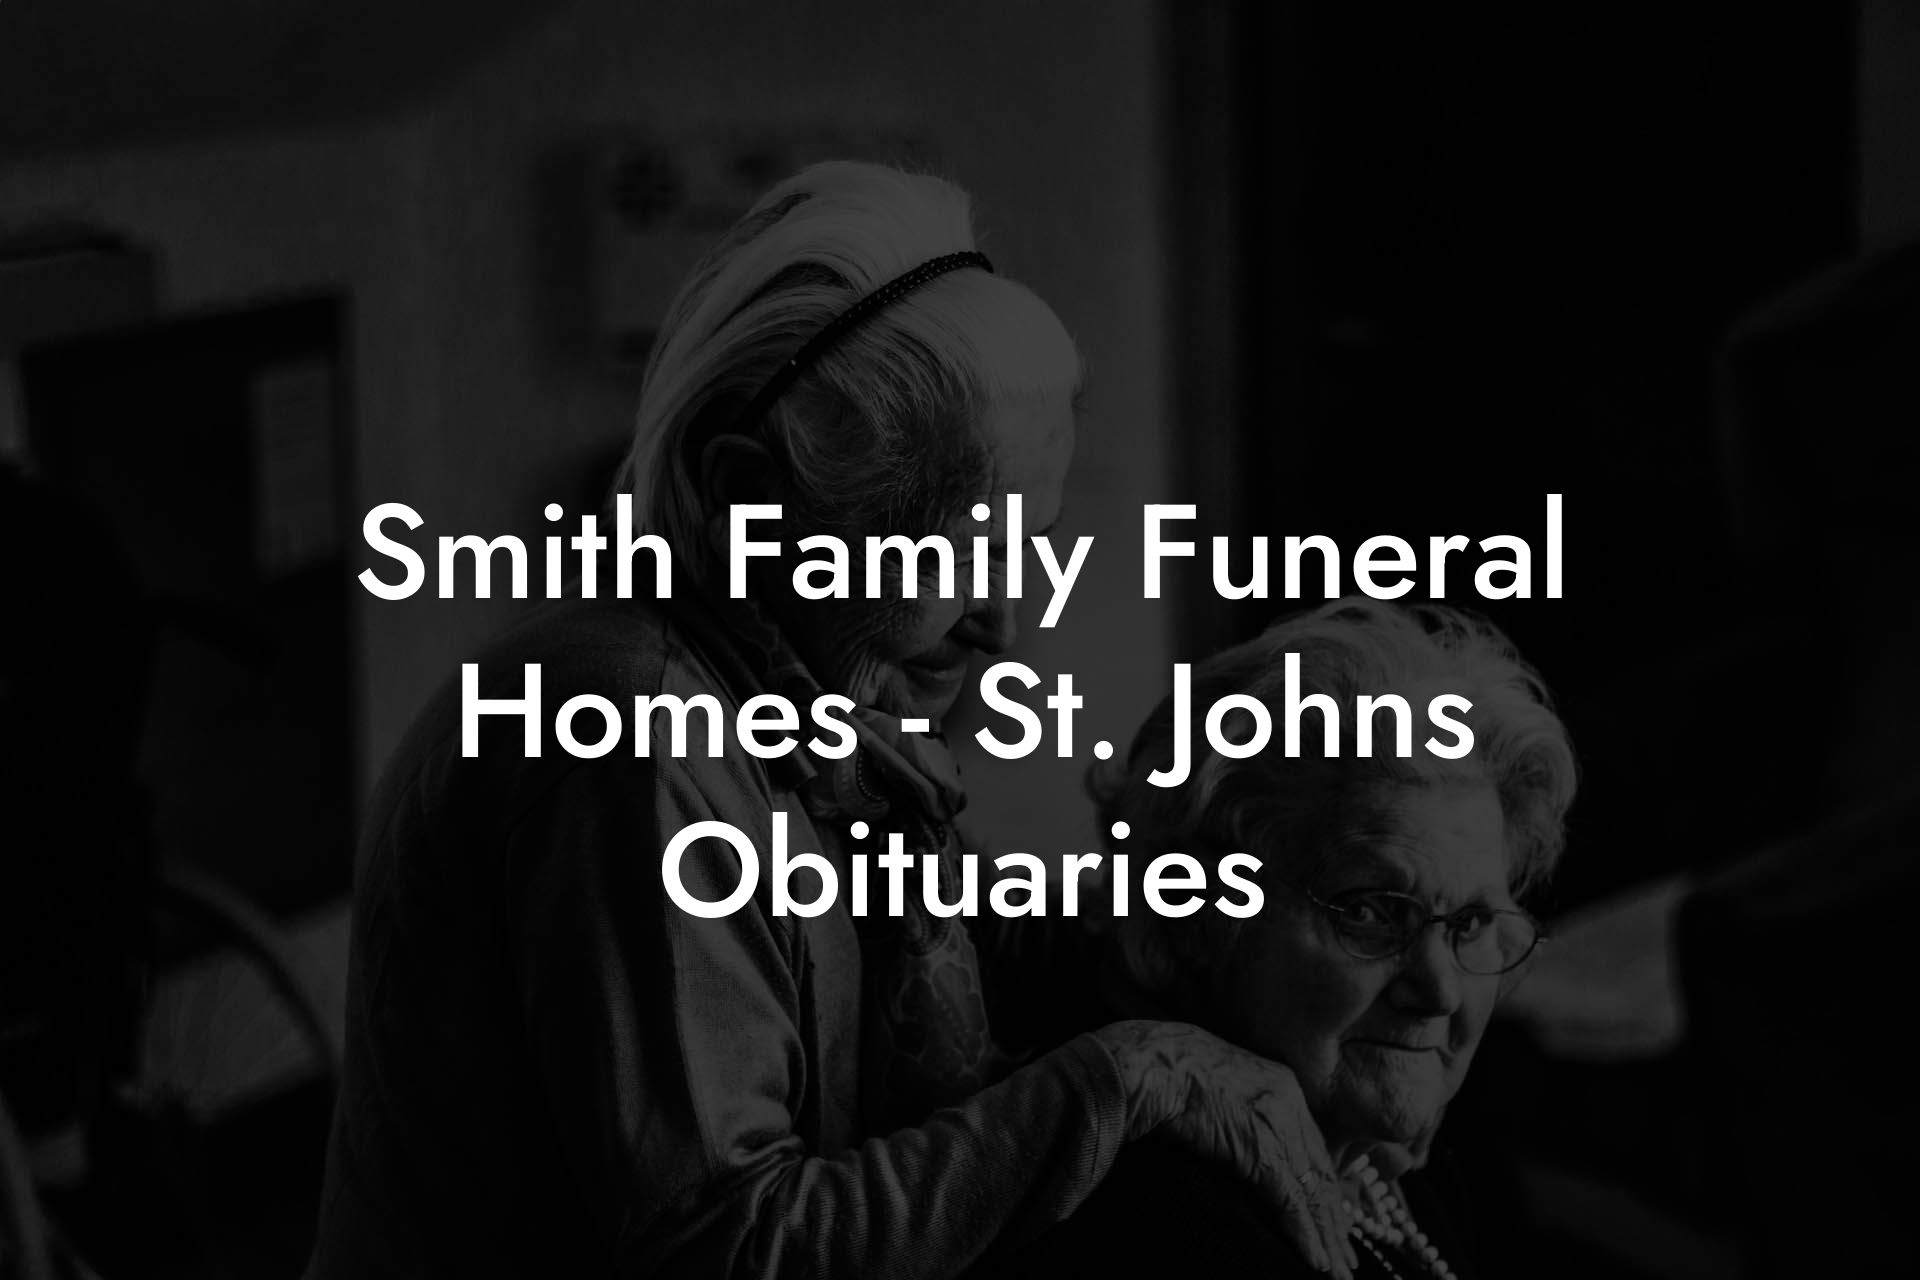 Smith Family Funeral Homes - St. Johns Obituaries